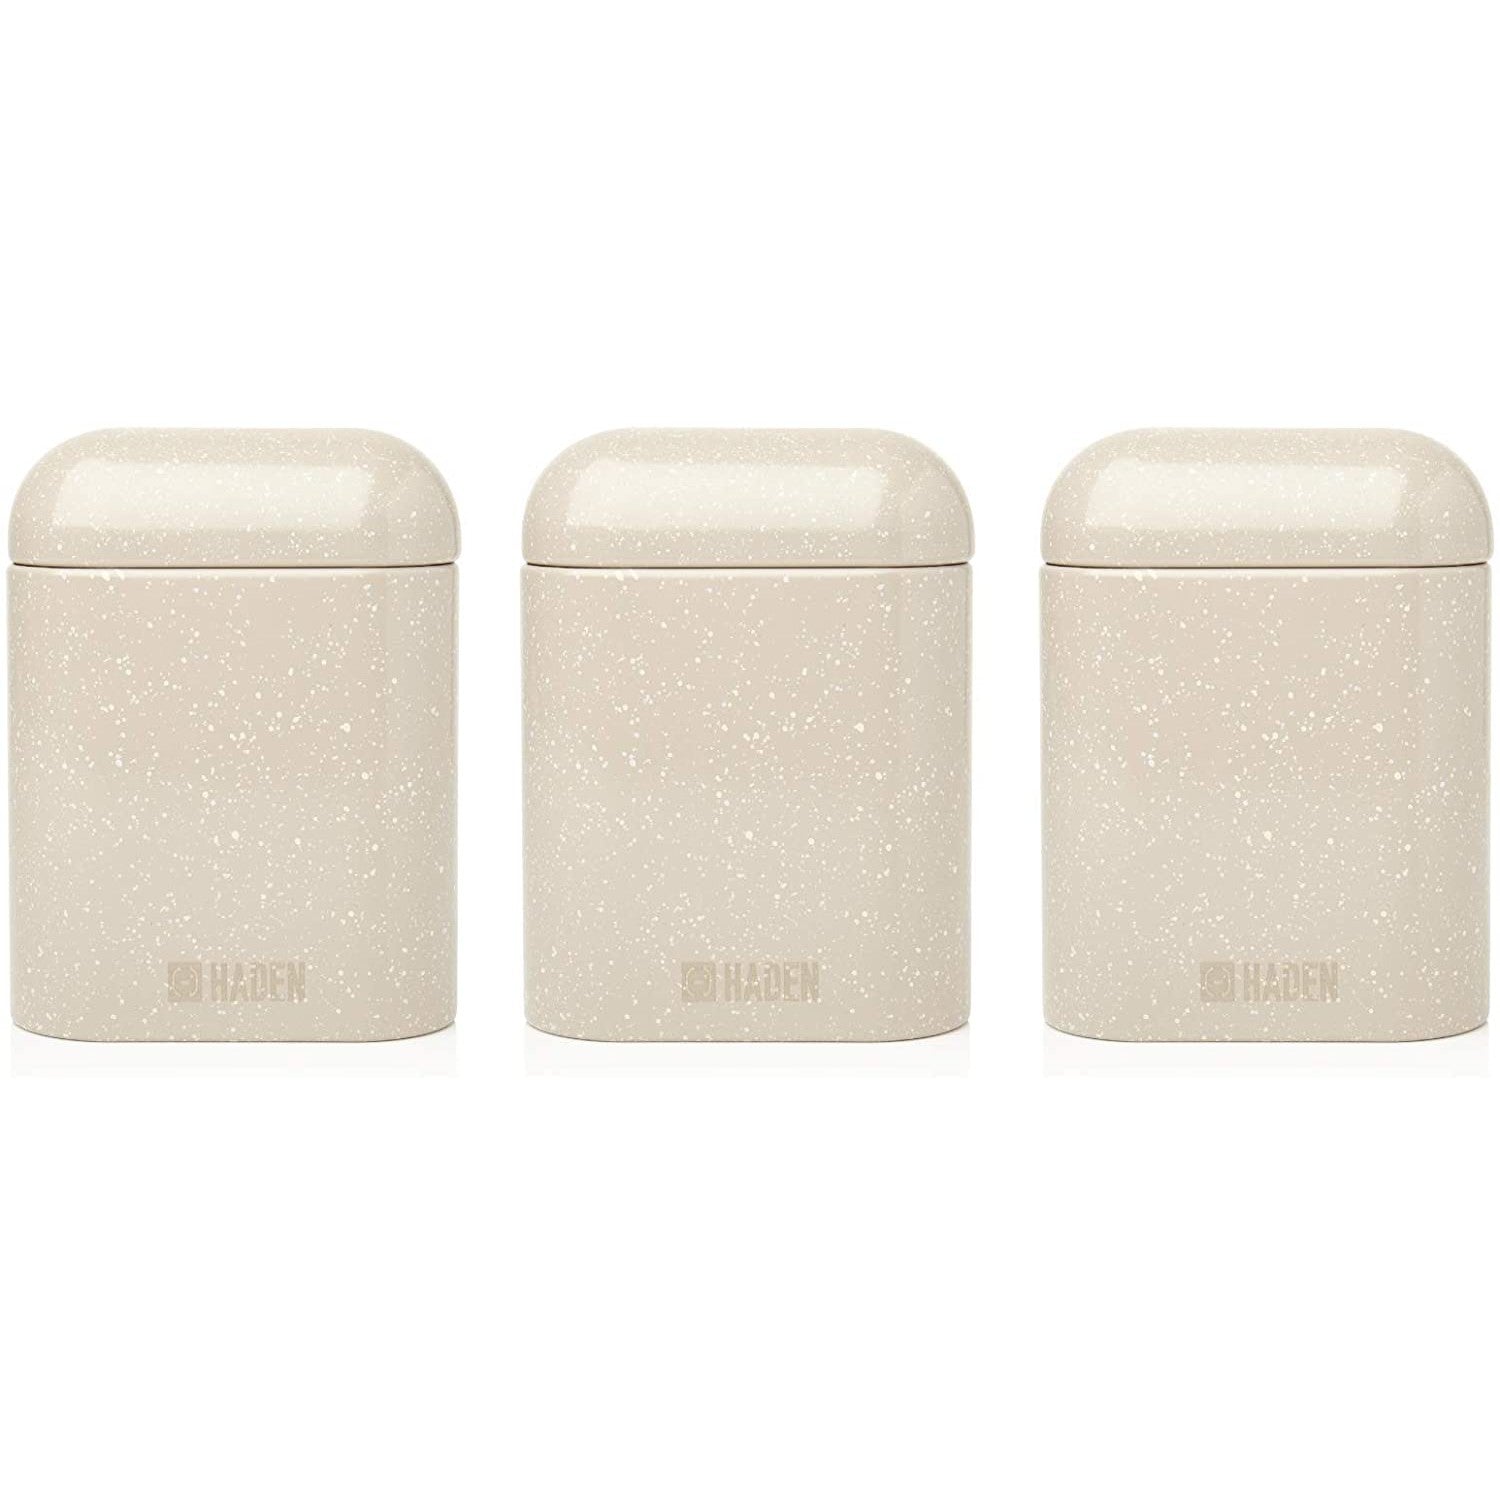 Haden Speckle Putty 3pc Canister Set